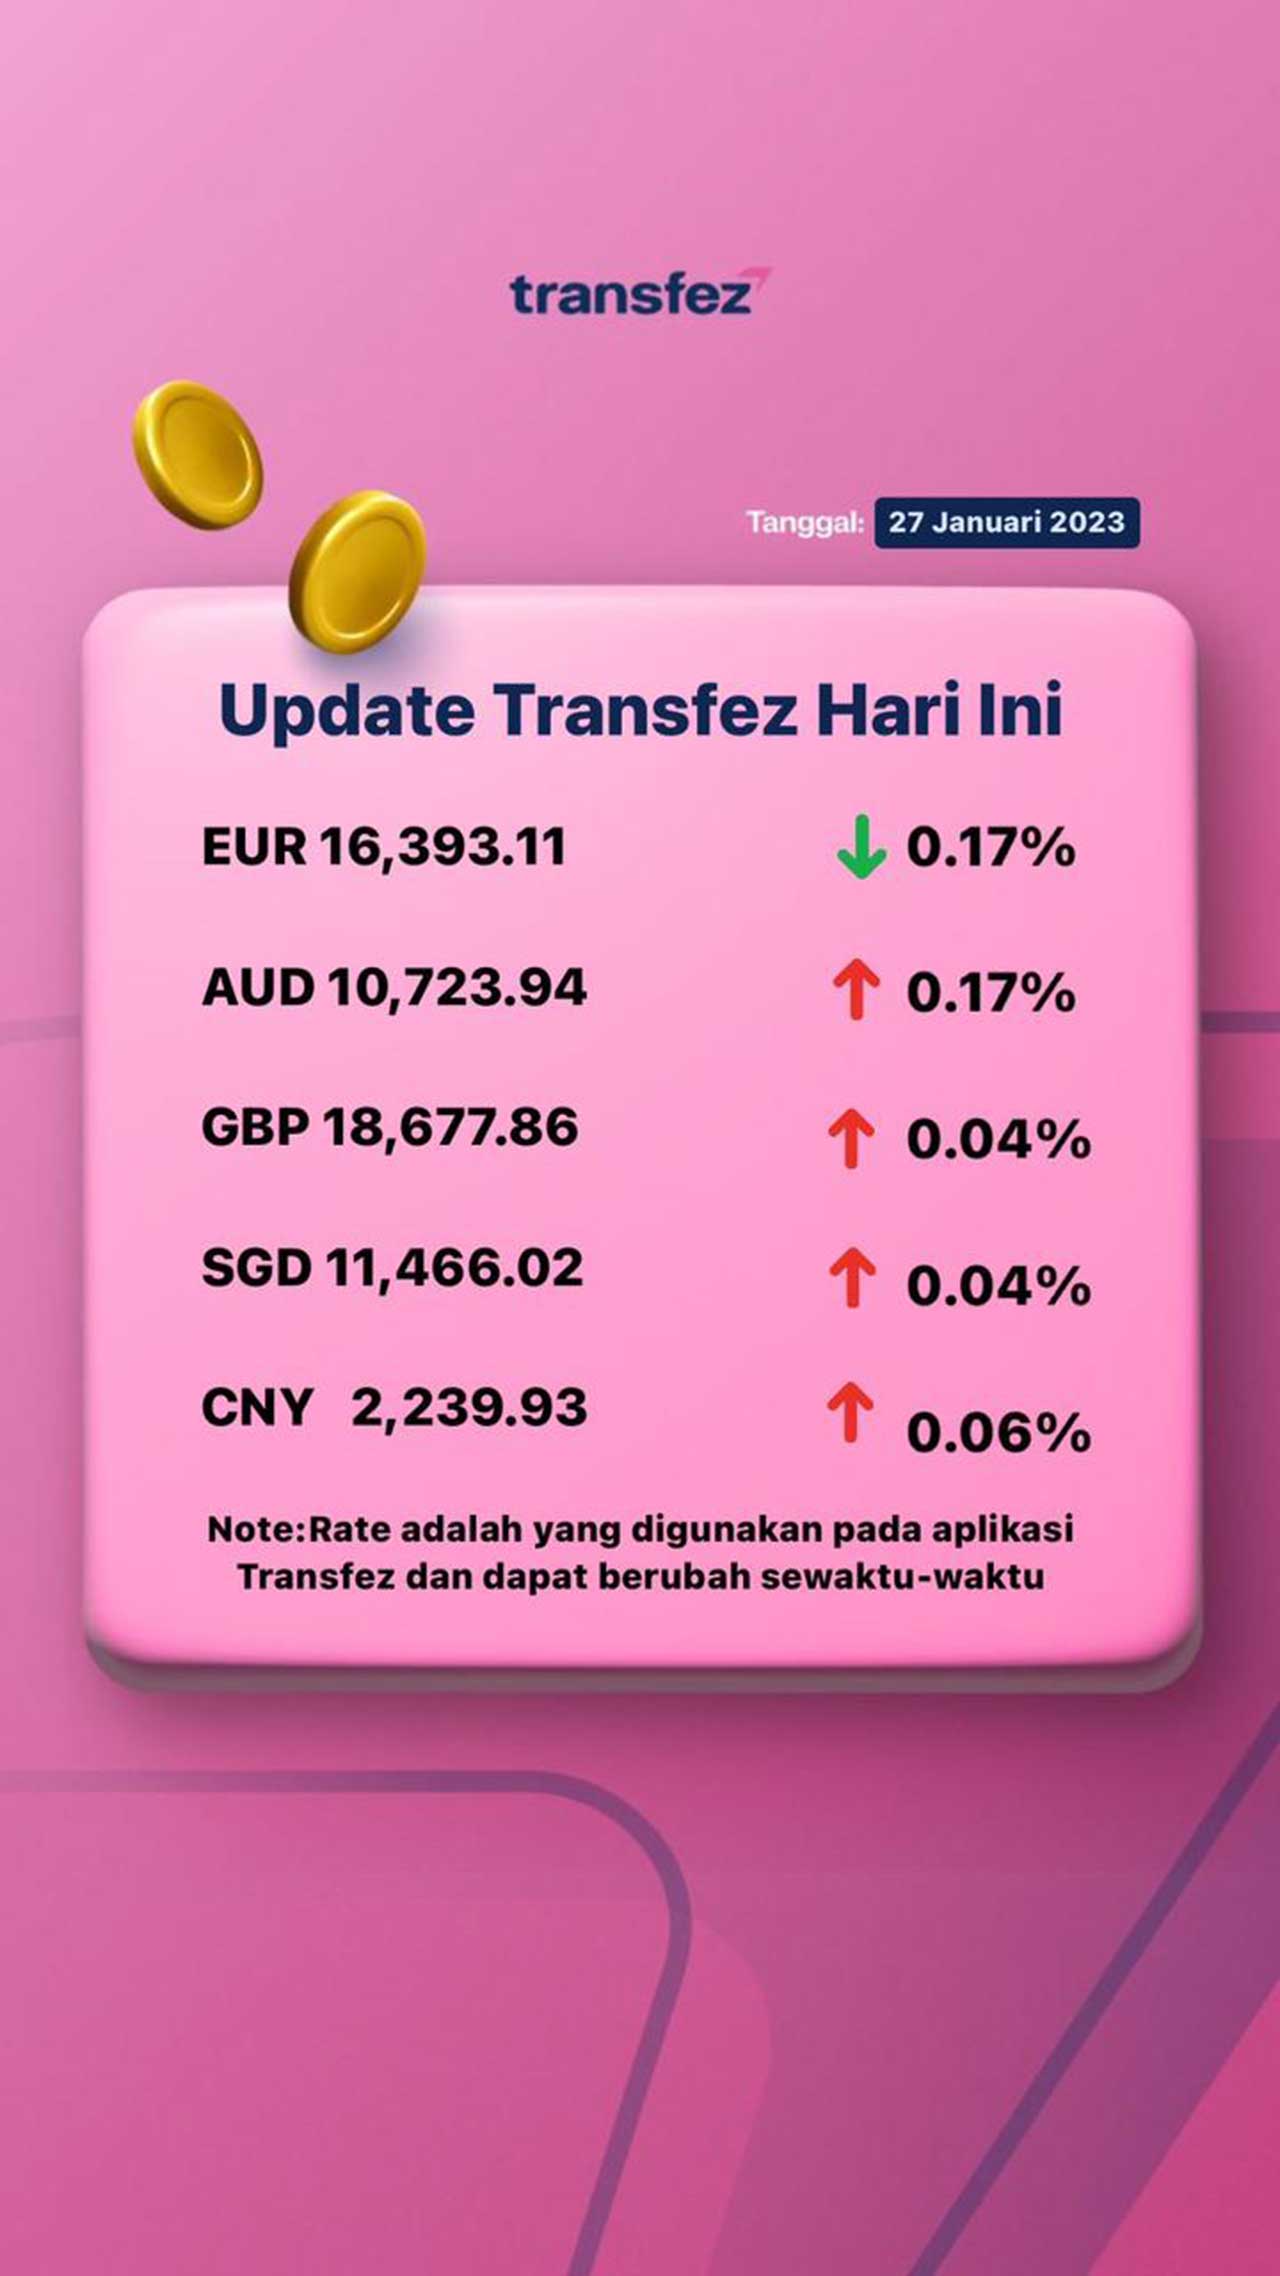 Today's Transfez Rate Update January 27 2023